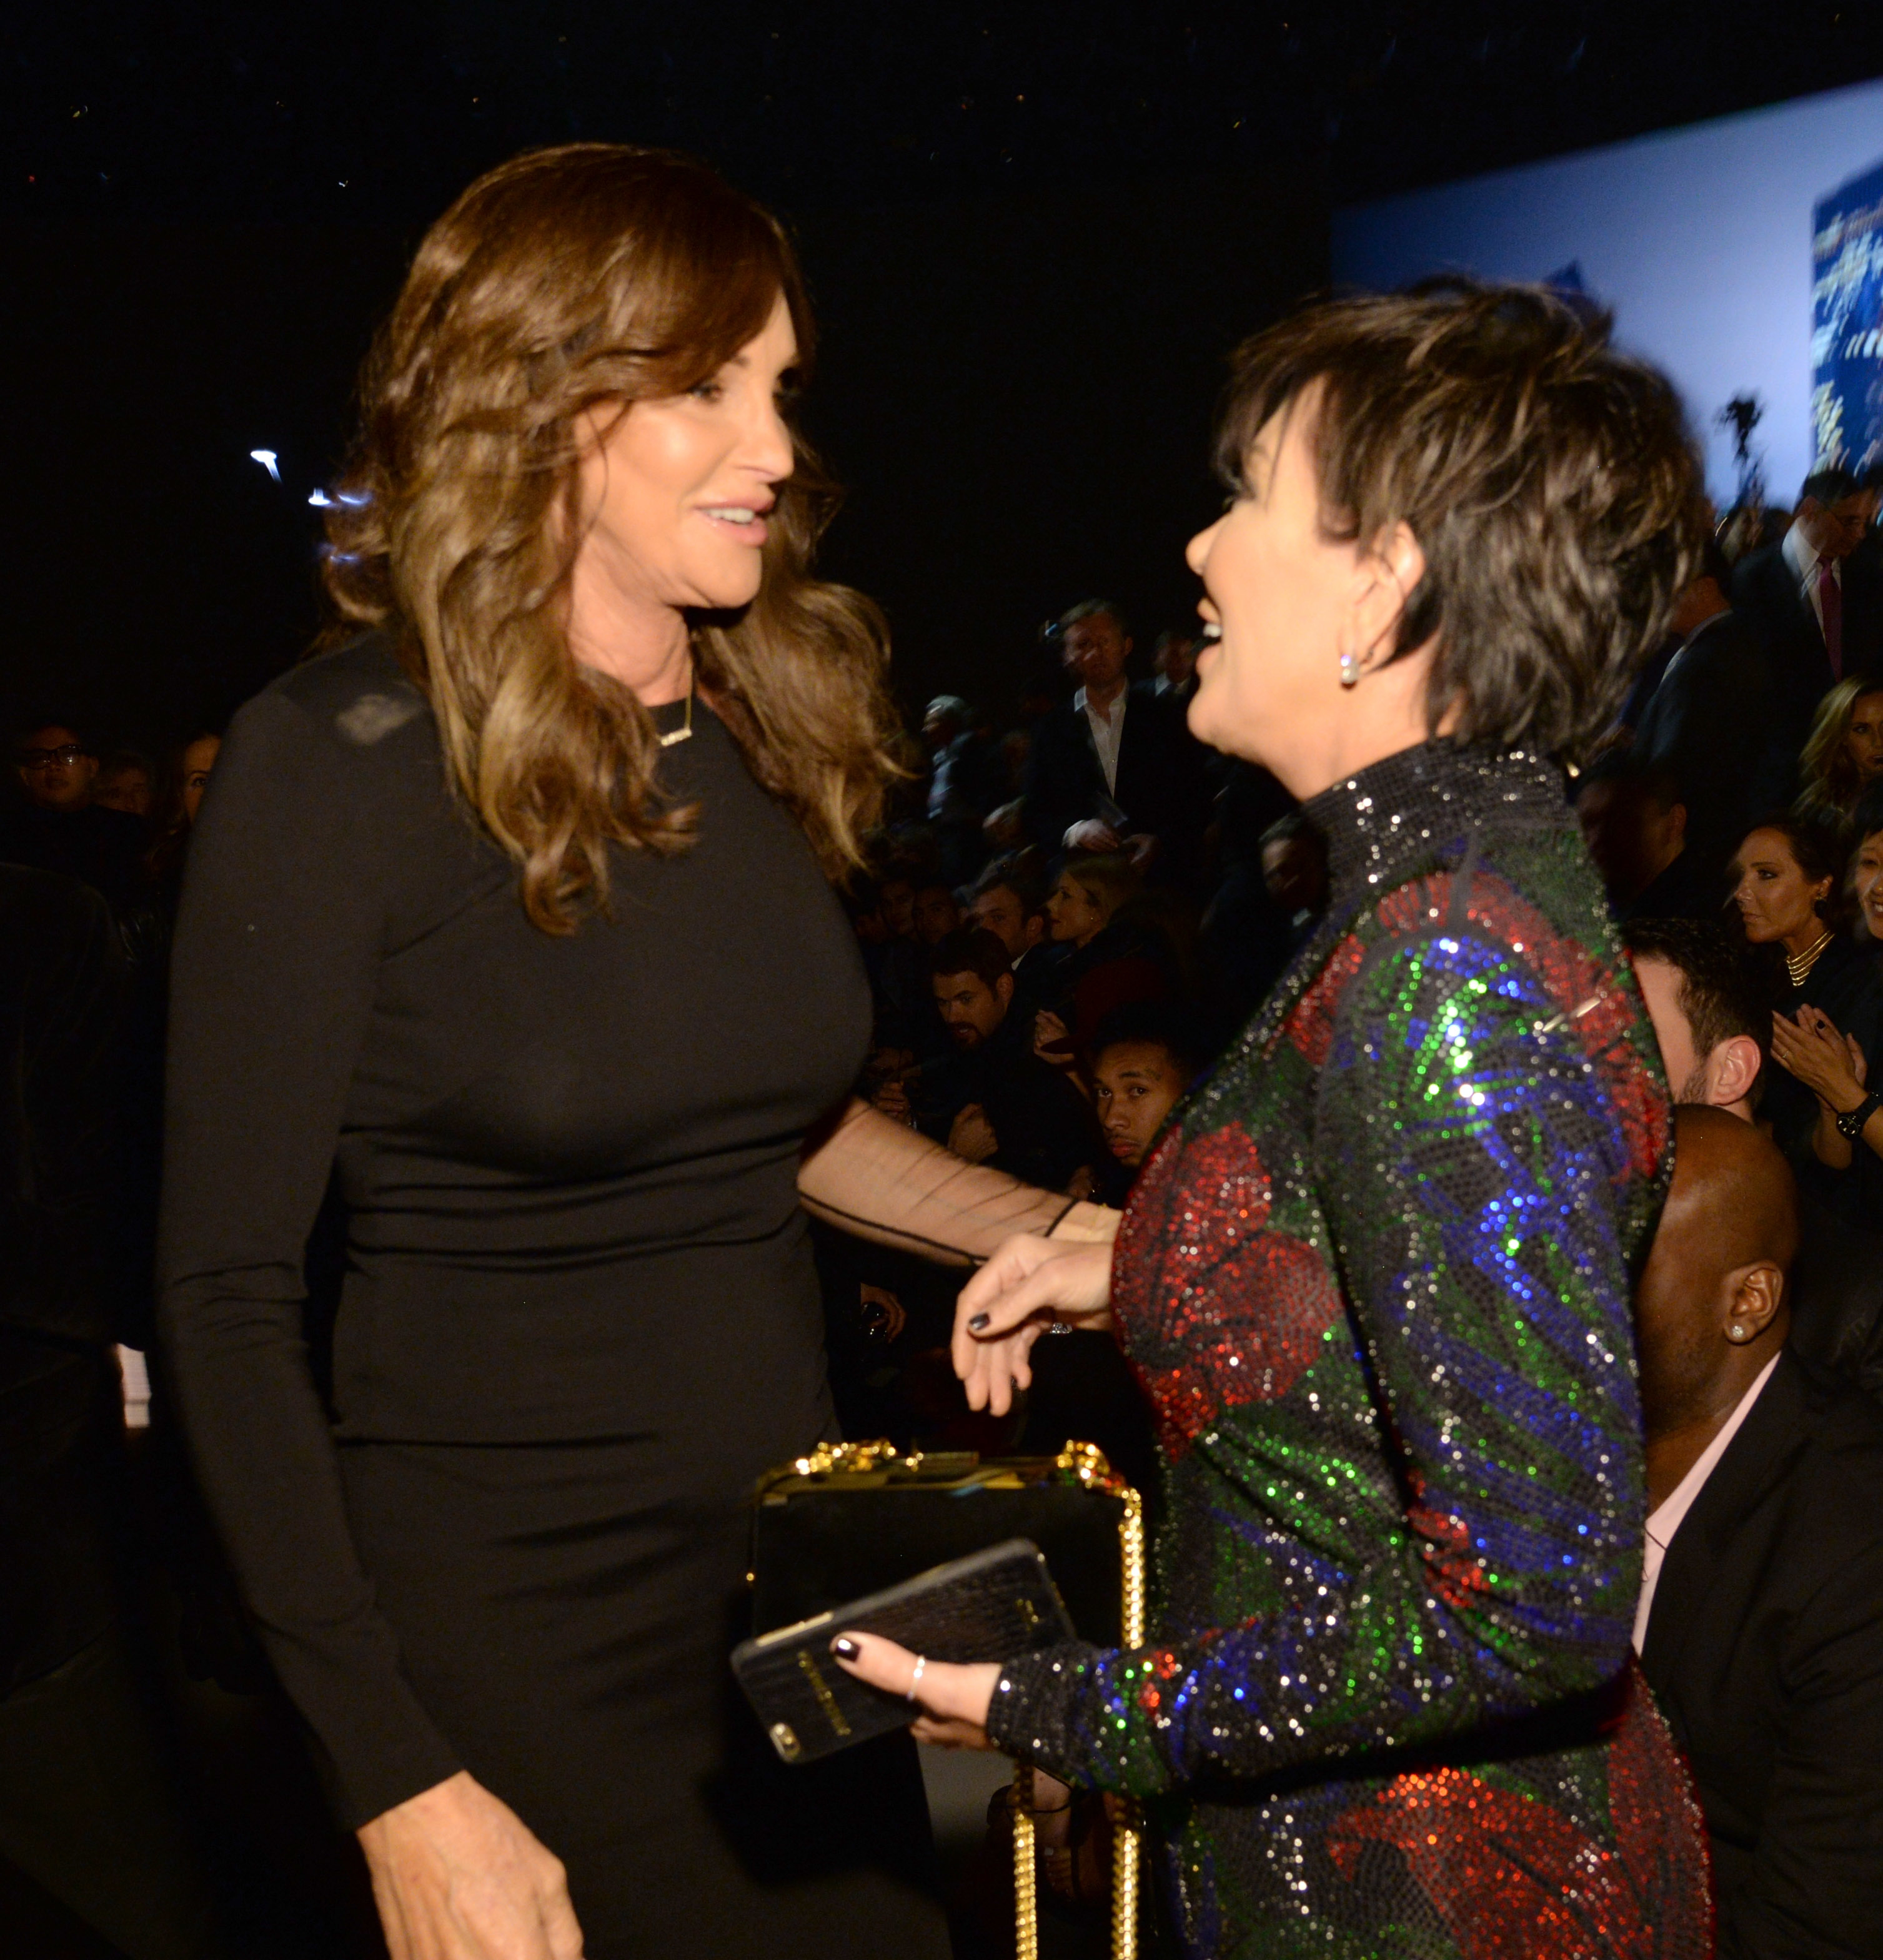 Close-up of Kris and Caitlyn facing each other and smiling